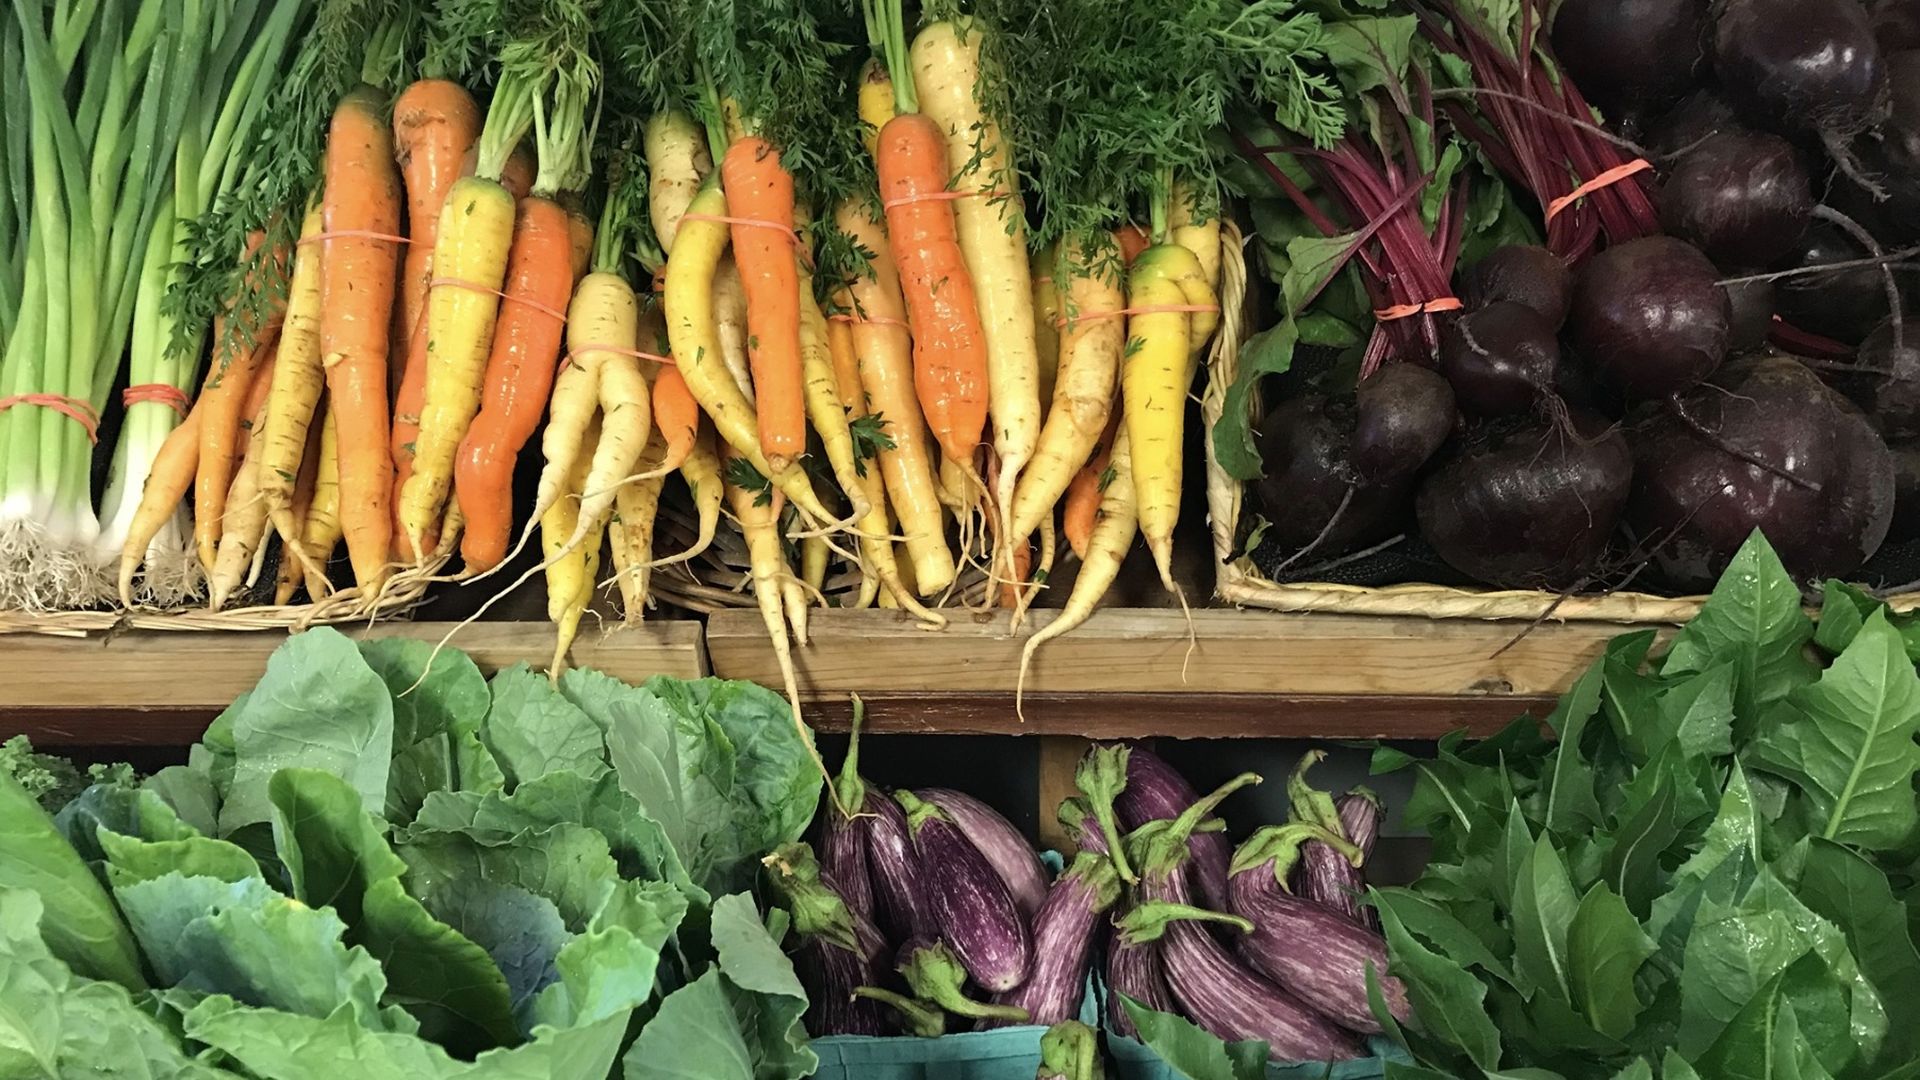 Carrots, eggplants and other vegetables